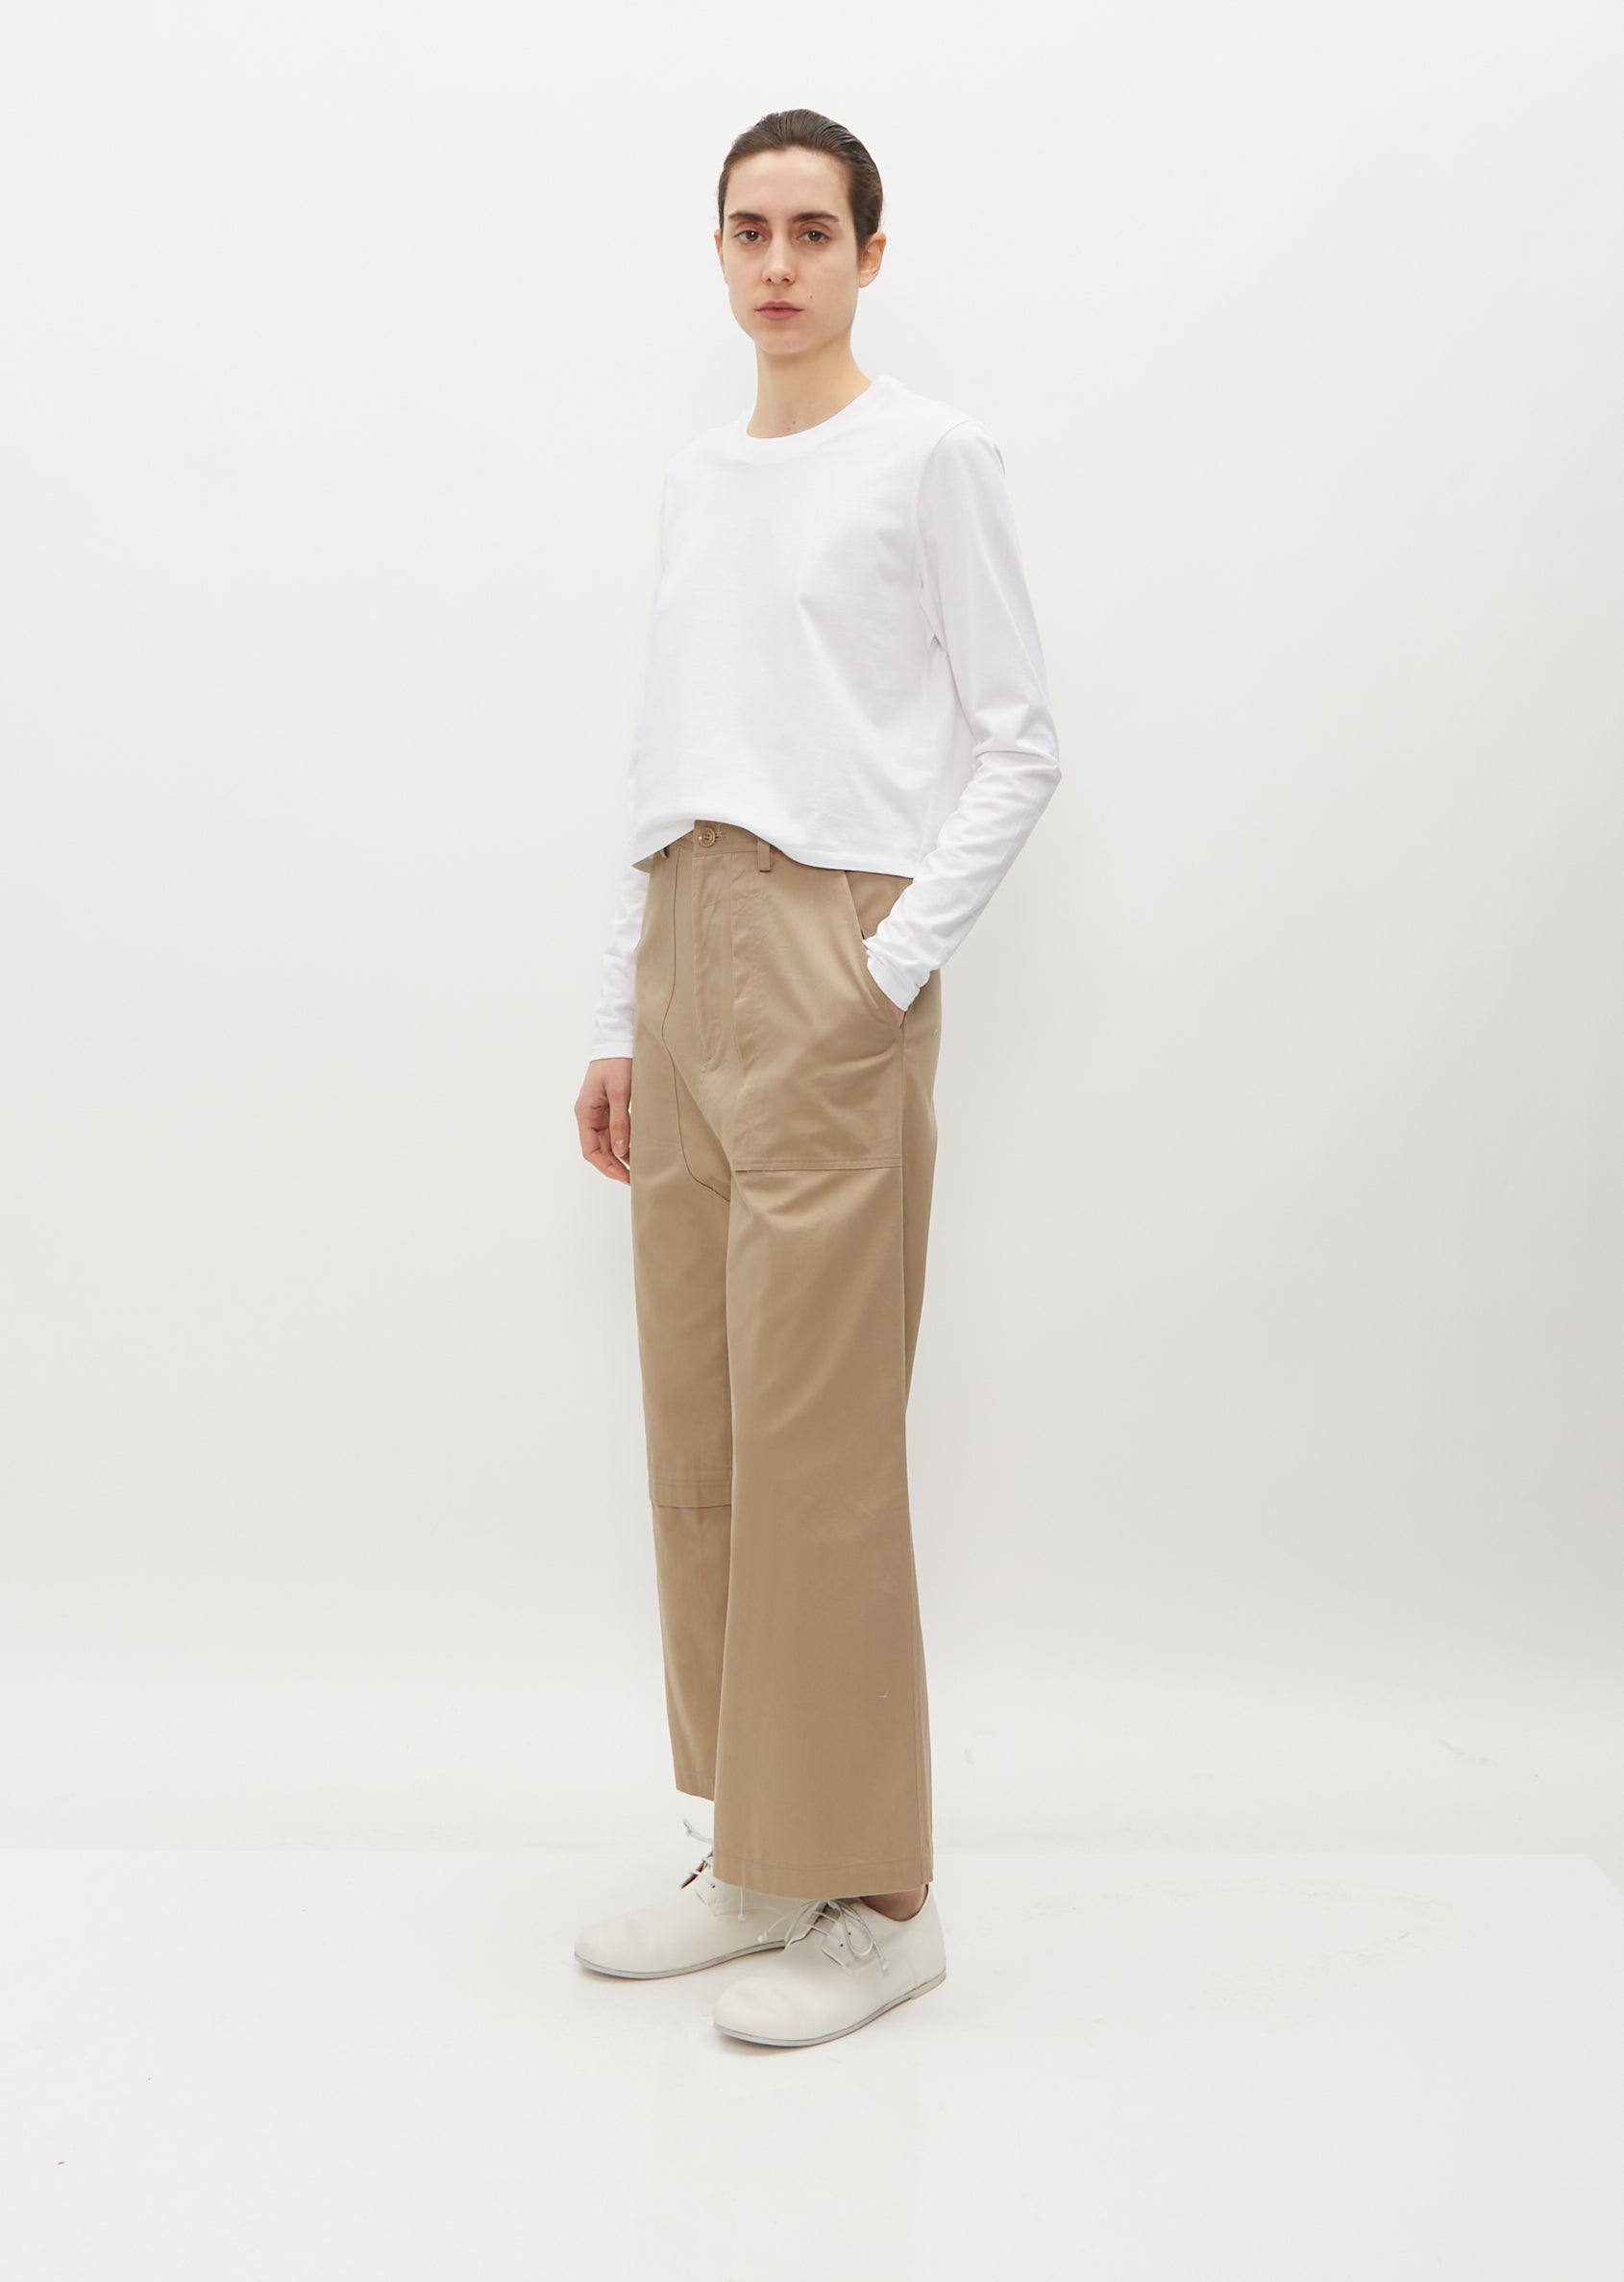 Buy Coffee Brown Straight Pants In Cotton Flax Online - W for Woman